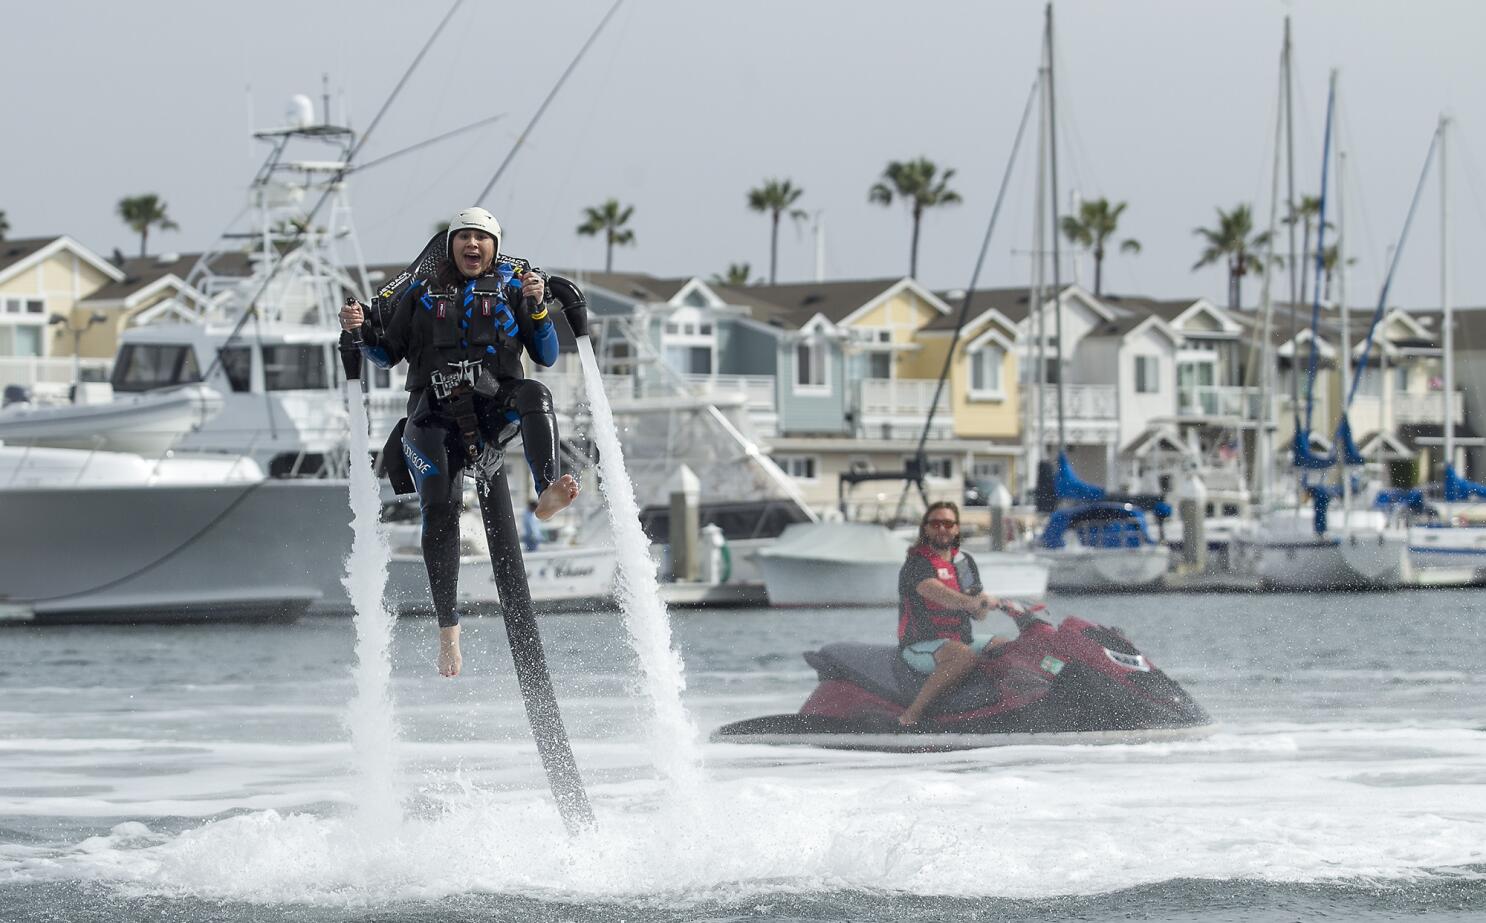 The latest upward trend for watersports – jetpacks – The Denver Post